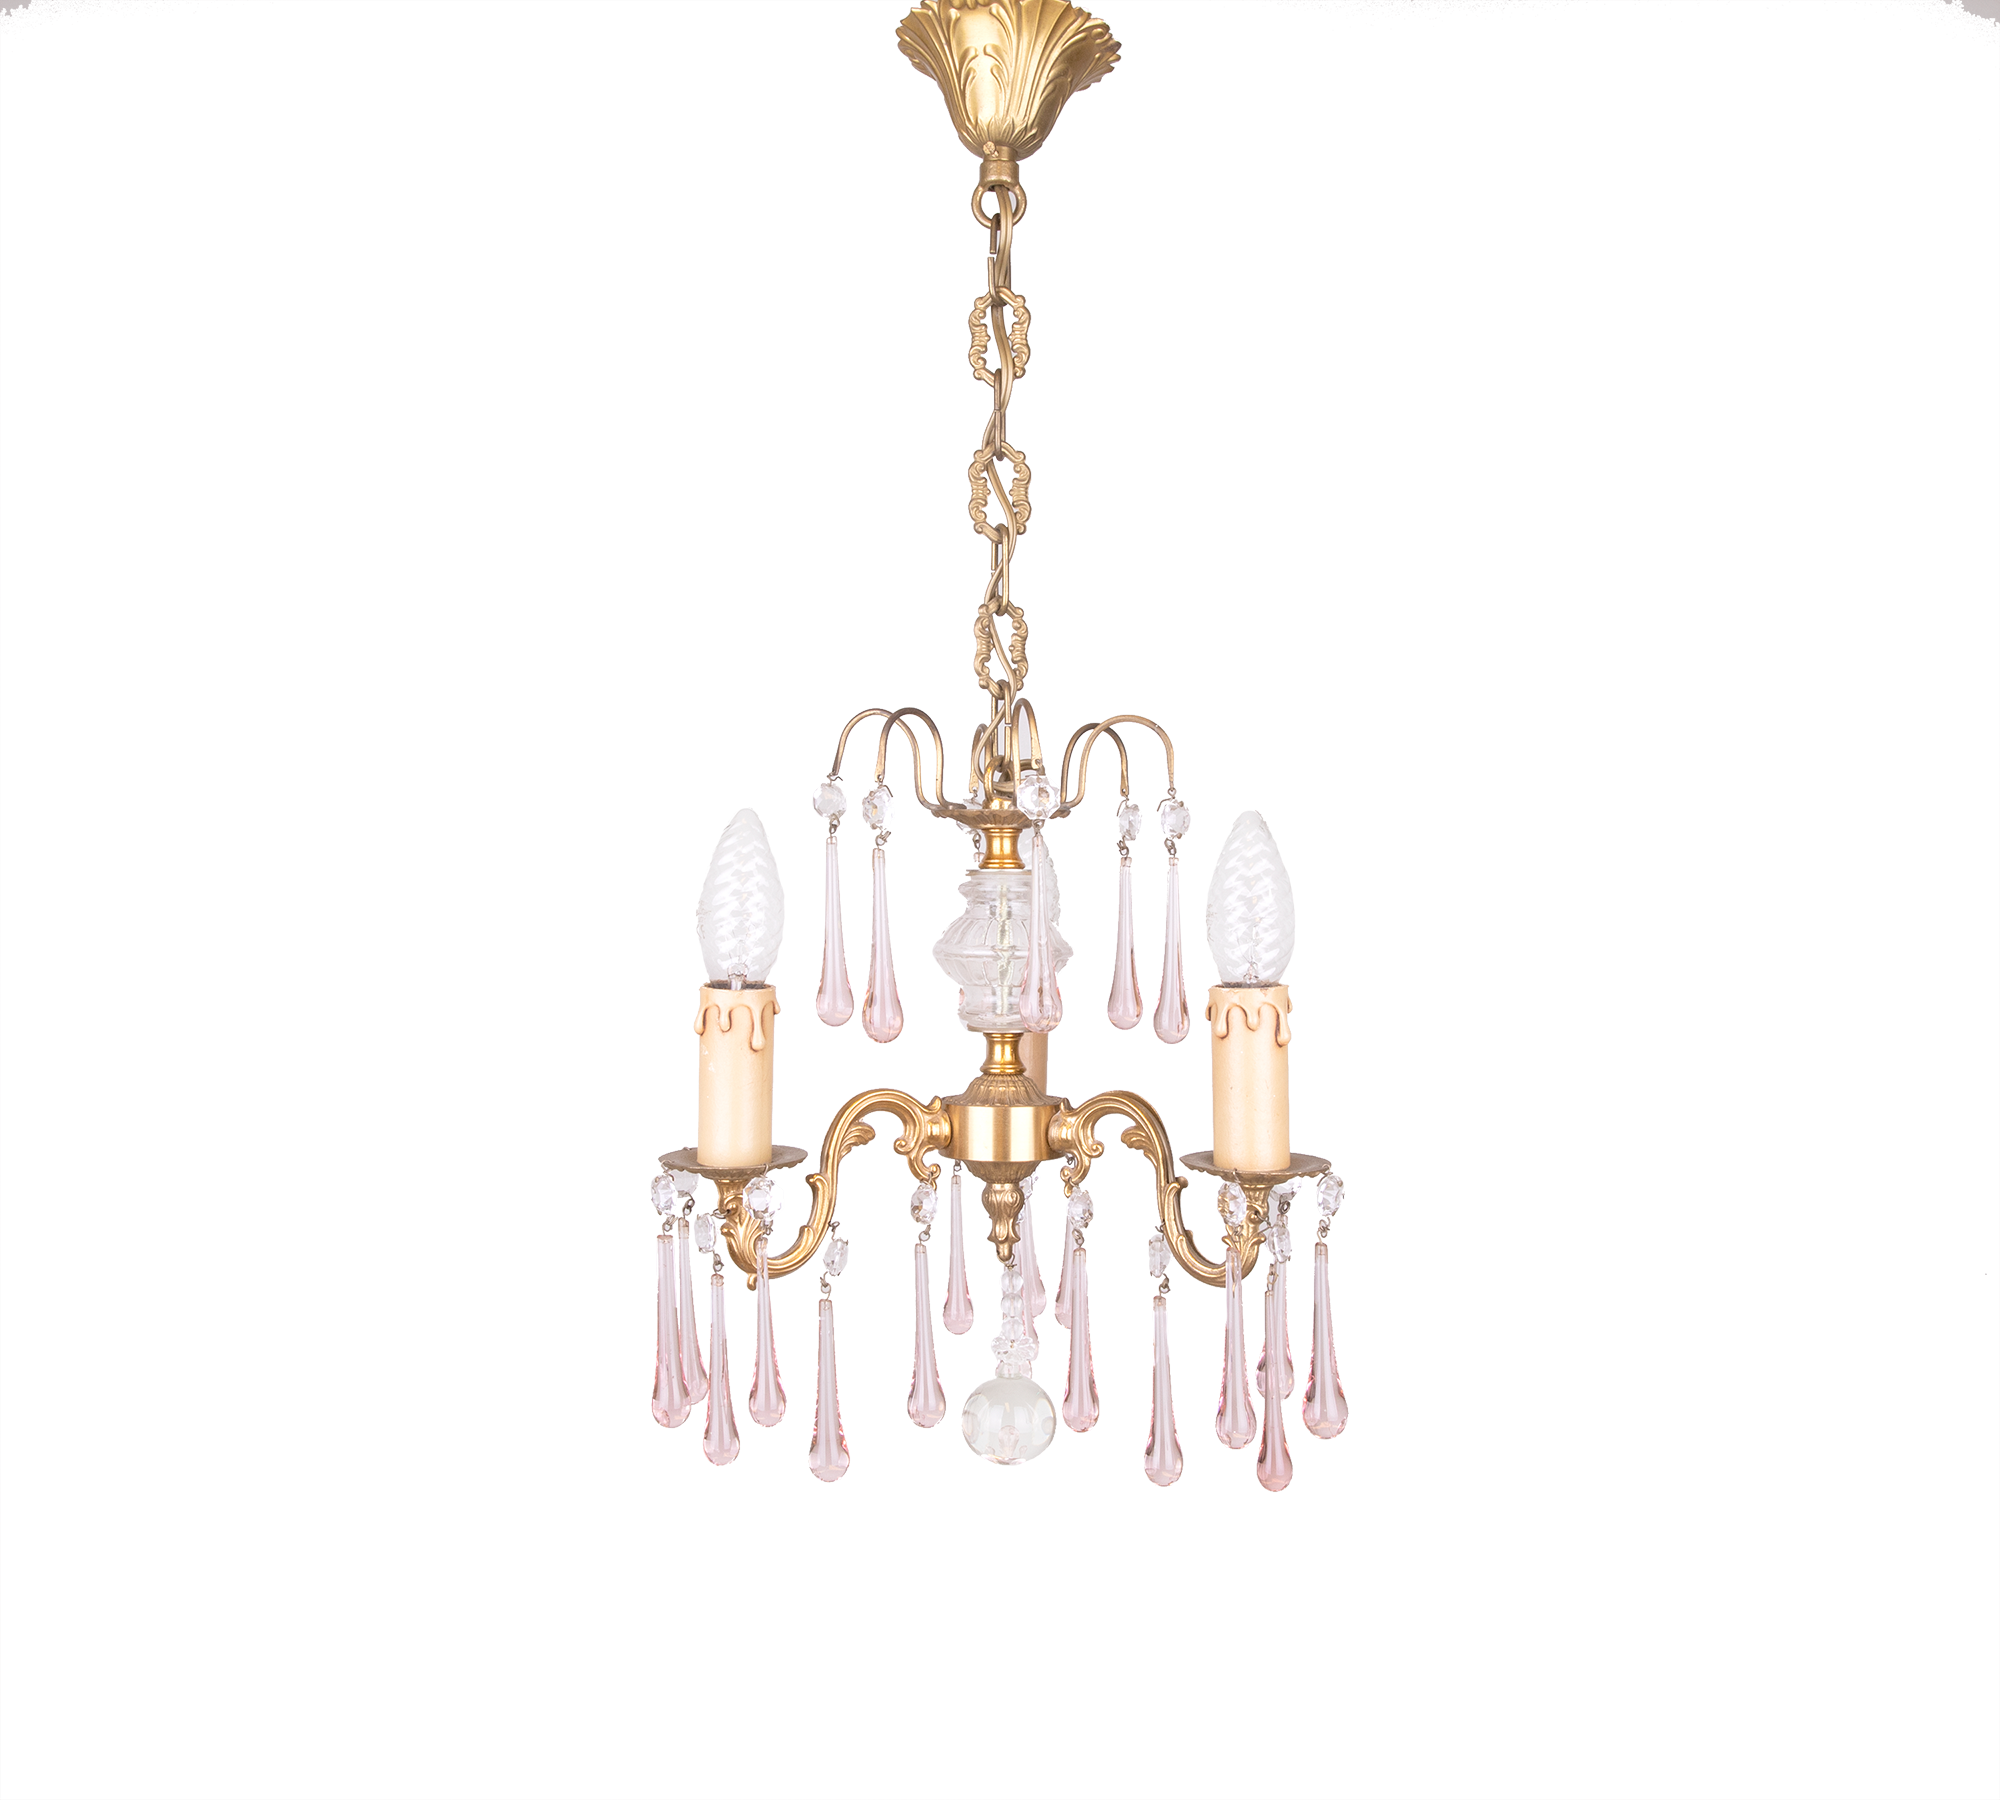 Lighting and glass - Art chandelier Brass Vintage drops with - pink Murano